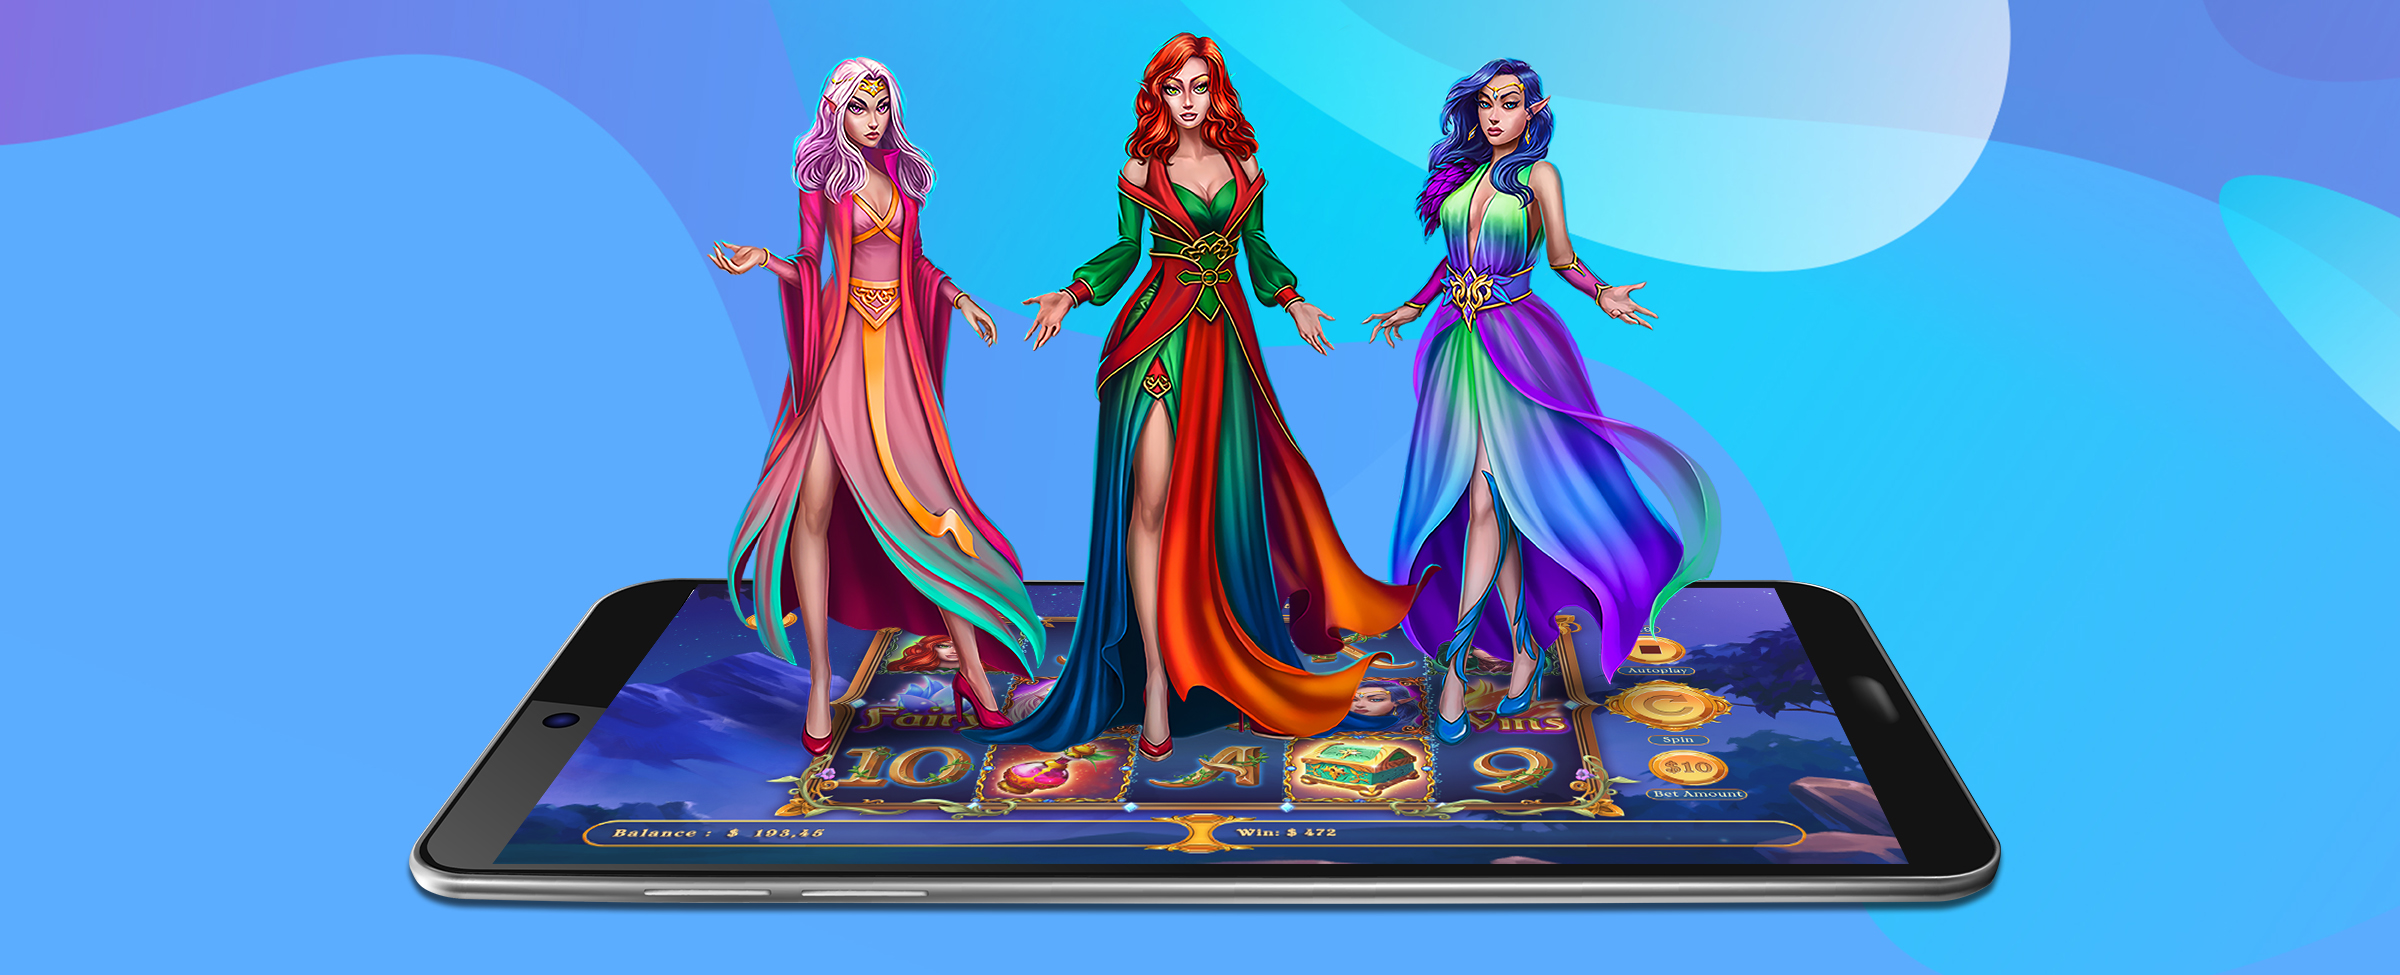 Channel your inner child with Fairy Wins – one of the most enchanted slot games you’ll find anywhere, right here to play on your mobile.